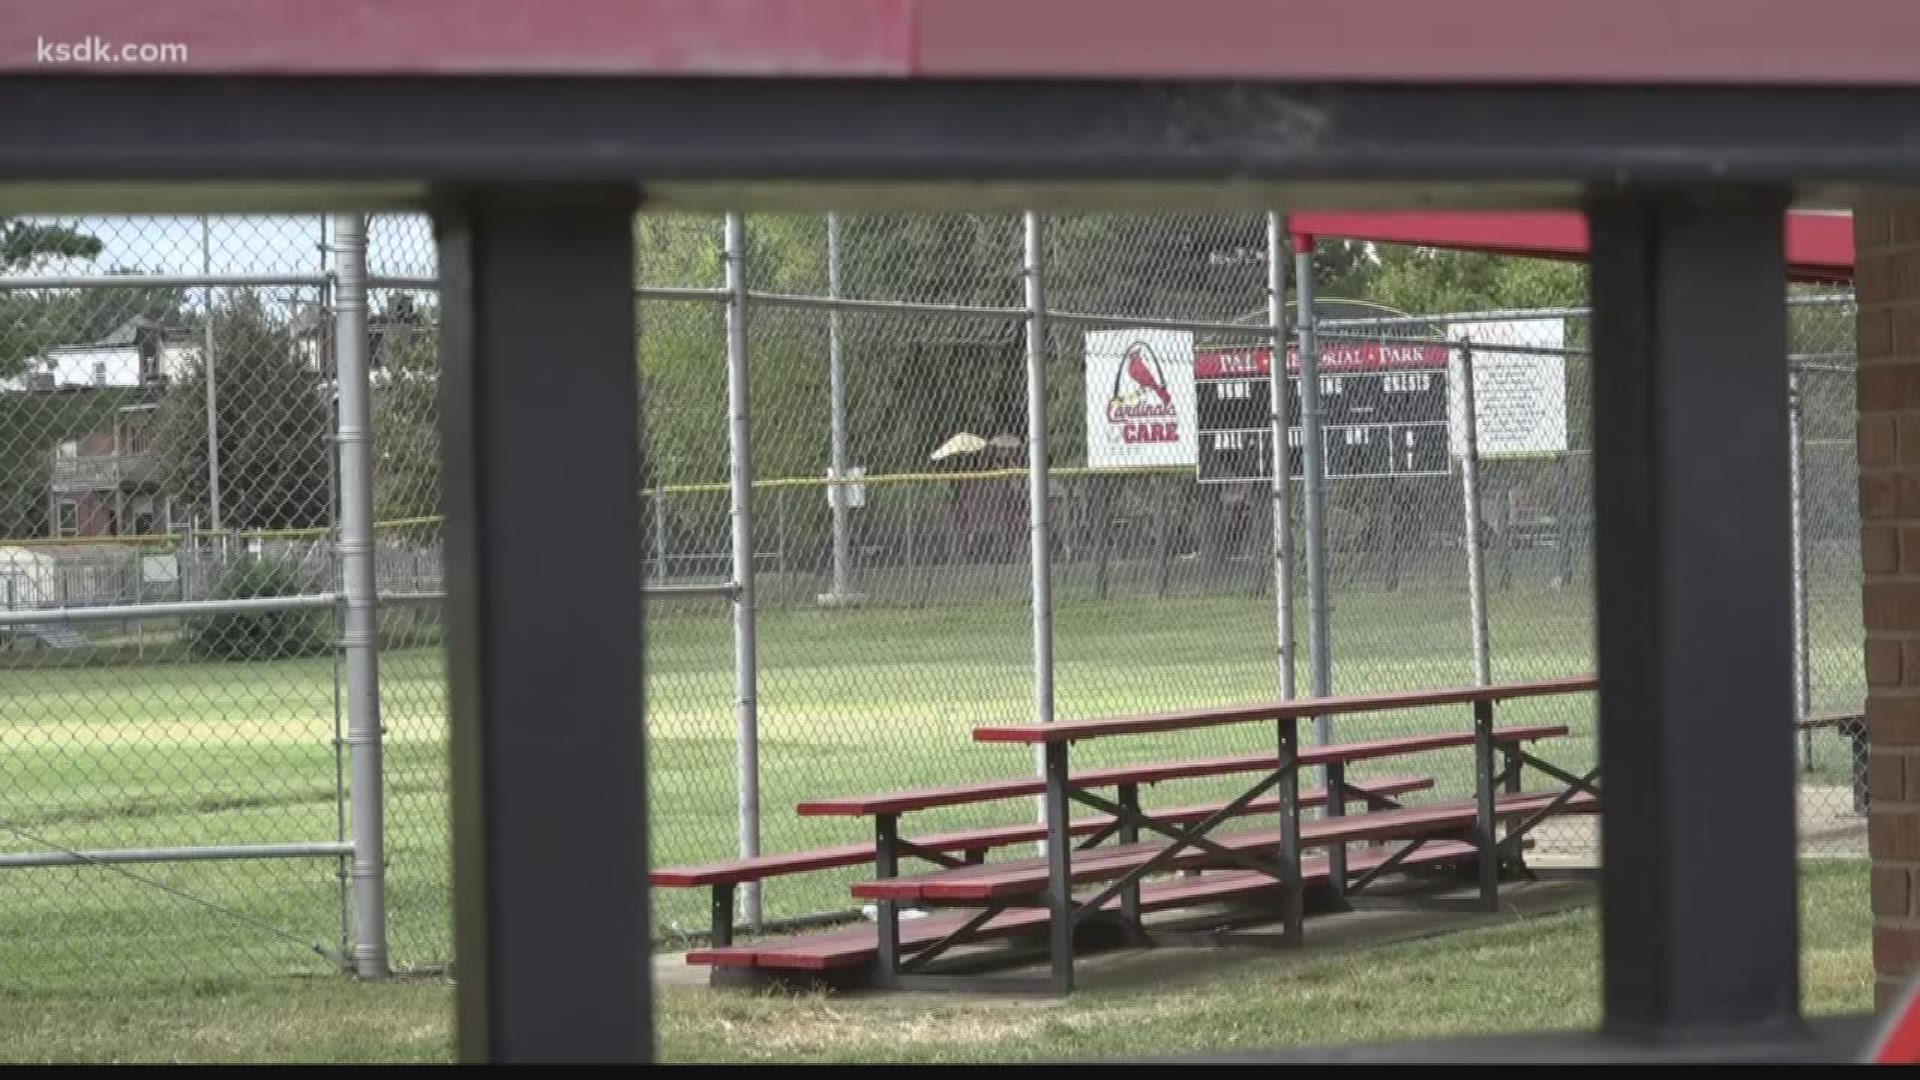 The South Side Rec League holds soccer matches in Fox Park, Marquette Park and McKinley Park.
But because of an incident, there won't be any kids on the fields.